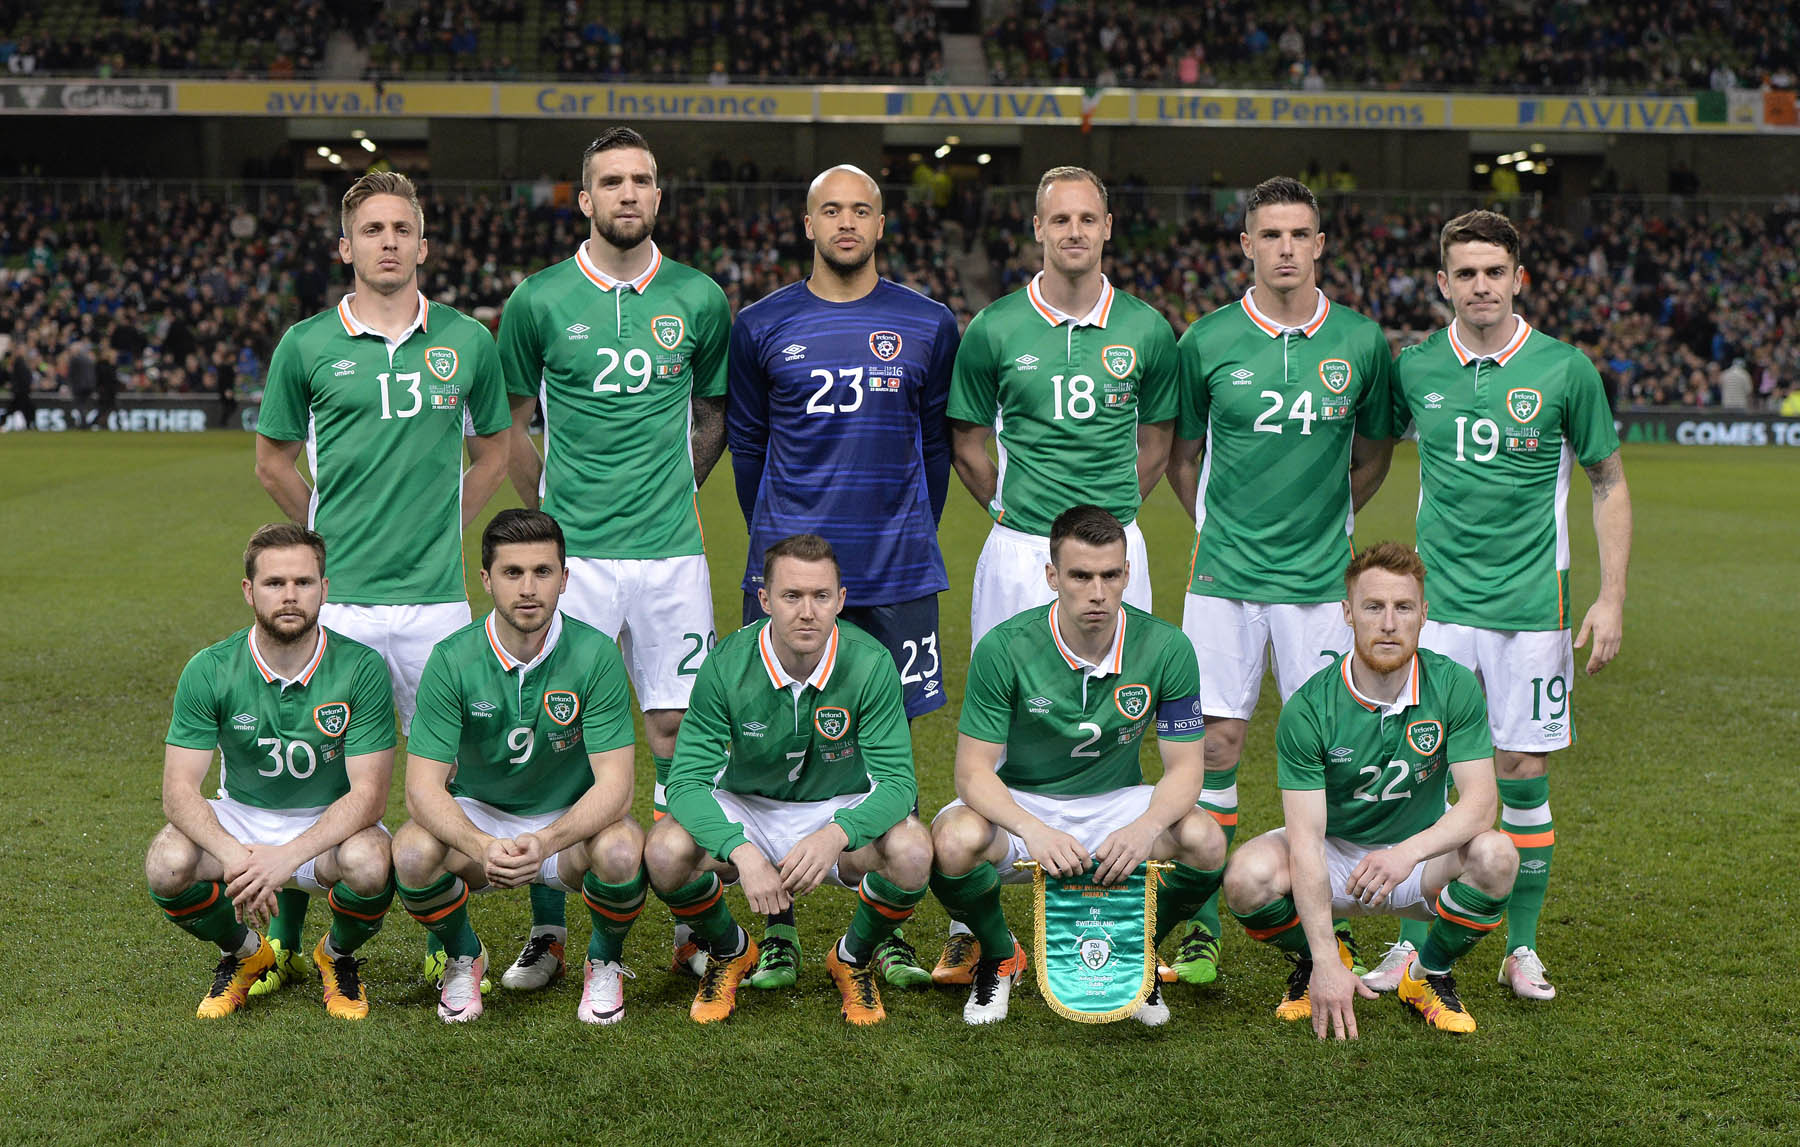 DUBLIN, IRELAND - MARCH 25: The Republic of Ireland team line up before the international friendly match between the Republic of Ireland and Switzerland at Aviva Stadium on March 25, 2016 in Dublin, Ireland. (Photo by Charles McQuillan/Getty Images)